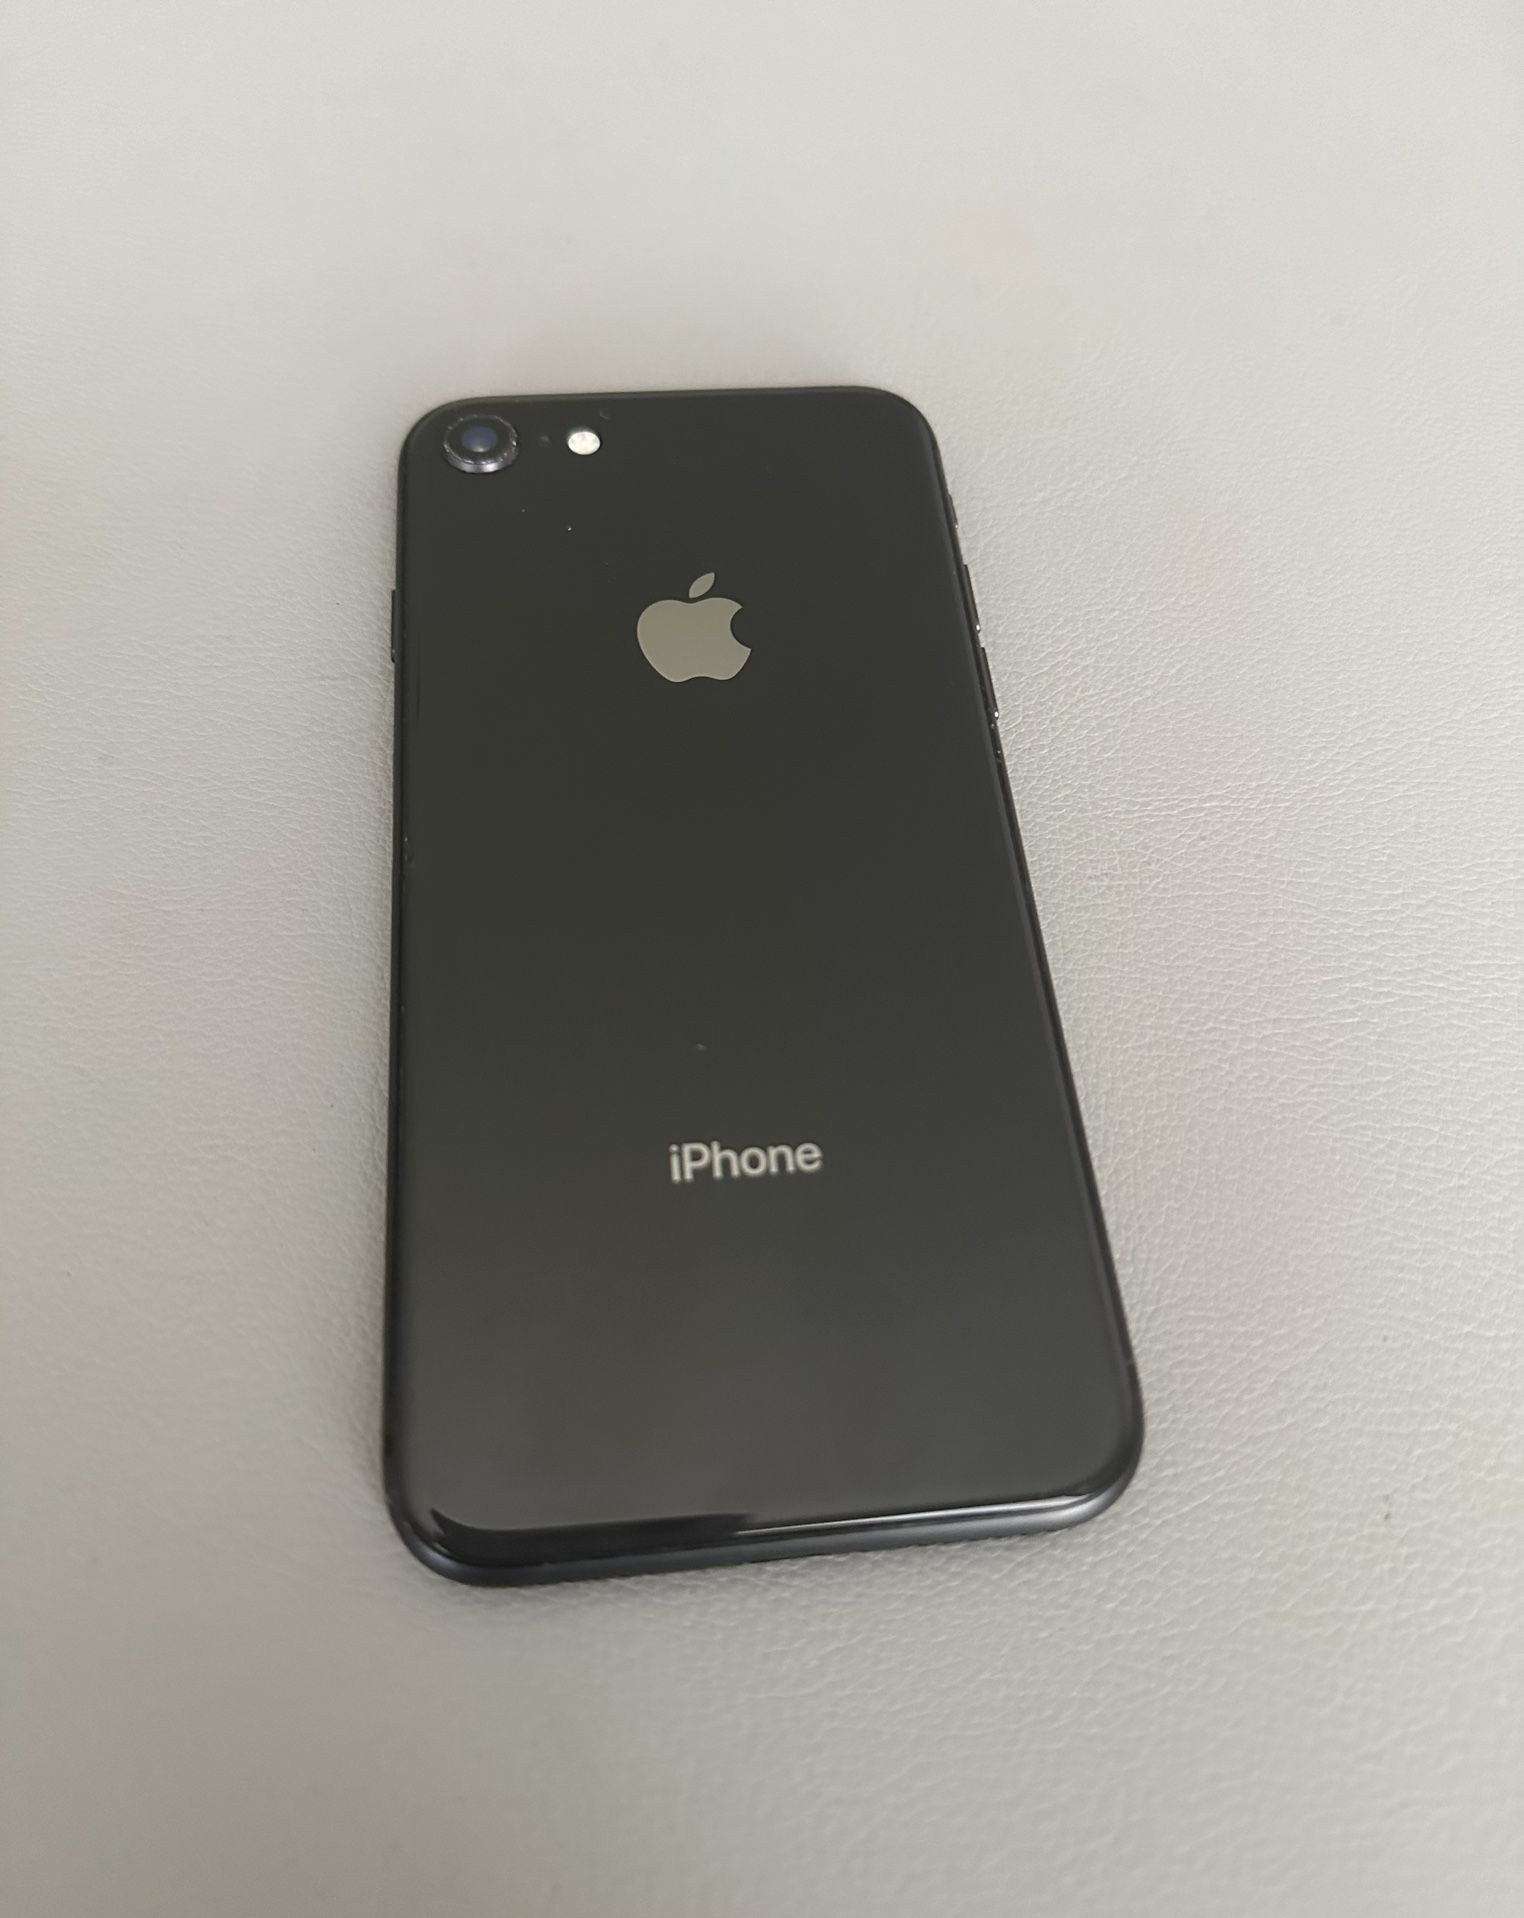   📲 iPhone 8  (64GB)  UNLOCKED 🌎 DESBLOQUEADO For All Carriers 